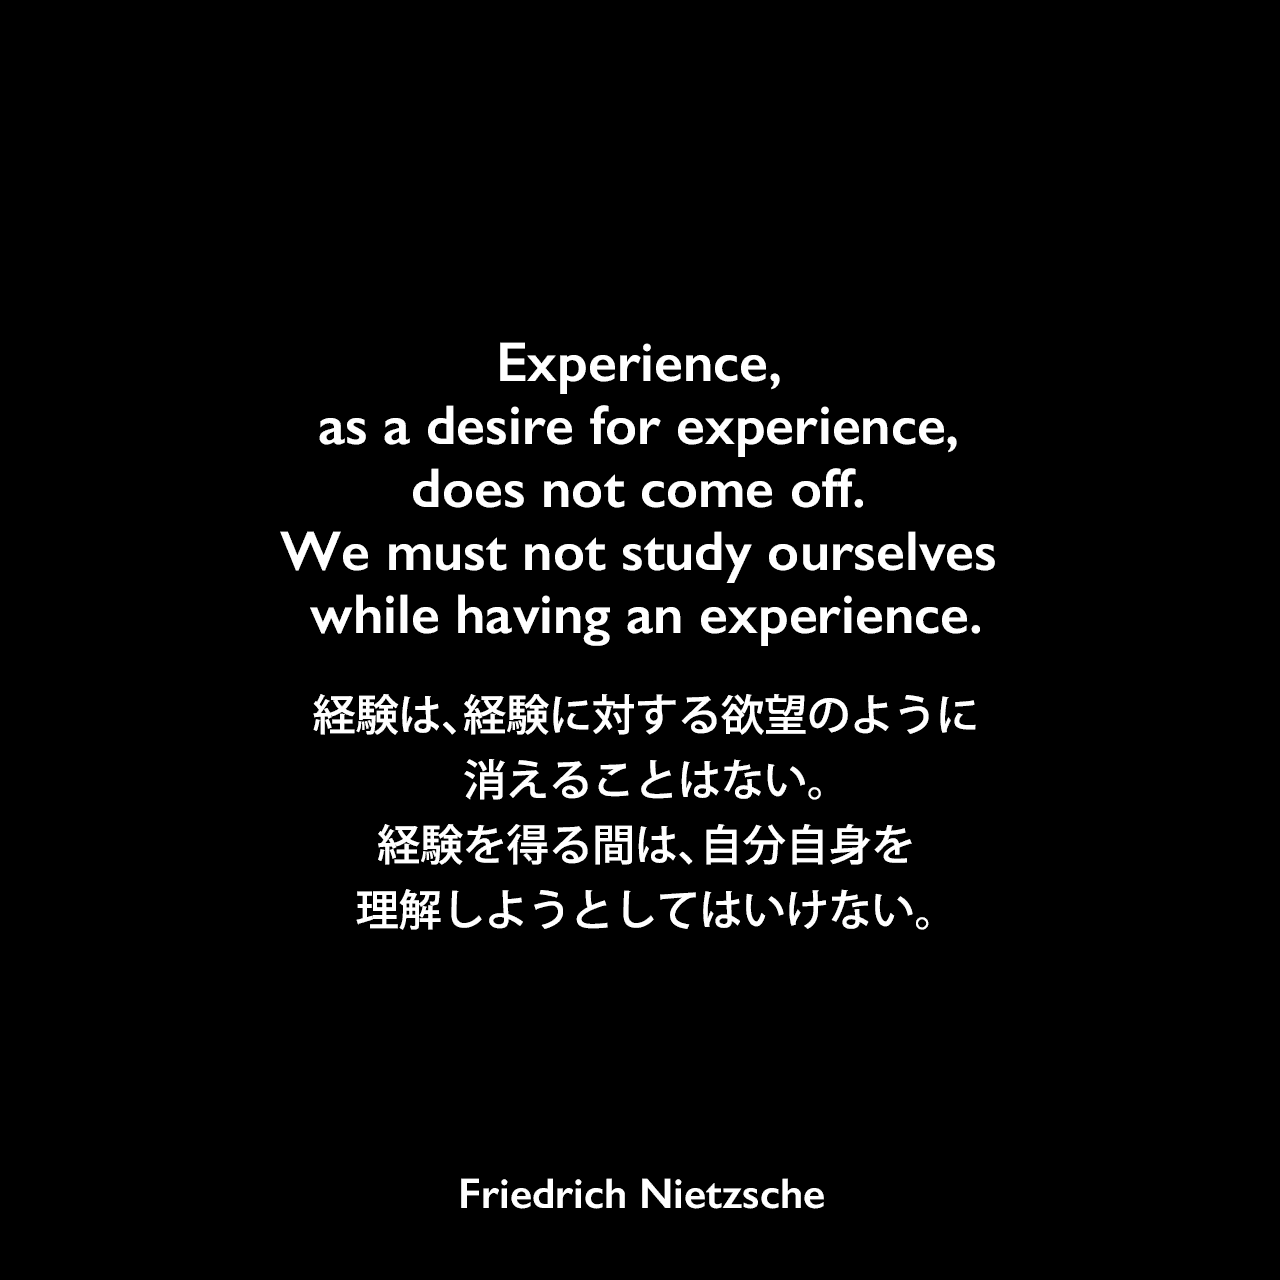 Experience, as a desire for experience, does not come off. We must not study ourselves while having an experience.経験は、経験に対する欲望のように消えることはない。経験を得る間は、自分自身を理解しようとしてはいけない。Friedrich Nietzsche